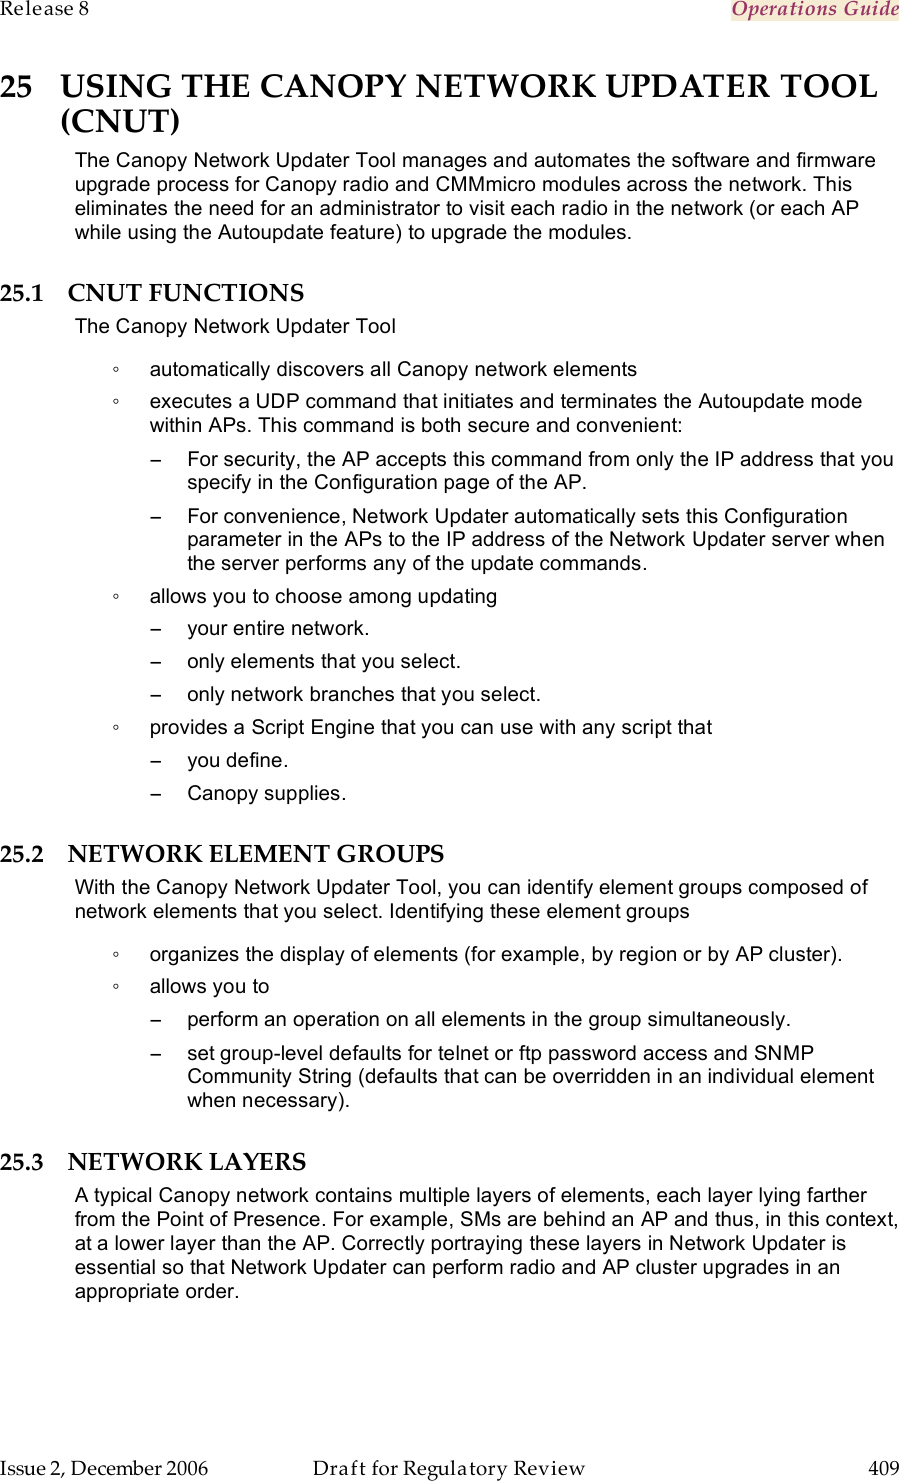 Release 8    Operations Guide   Issue 2, December 2006  Draft for Regulatory Review  409     25 USING THE CANOPY NETWORK UPDATER TOOL (CNUT) The Canopy Network Updater Tool manages and automates the software and firmware upgrade process for Canopy radio and CMMmicro modules across the network. This eliminates the need for an administrator to visit each radio in the network (or each AP while using the Autoupdate feature) to upgrade the modules.  25.1 CNUT FUNCTIONS The Canopy Network Updater Tool ◦  automatically discovers all Canopy network elements ◦  executes a UDP command that initiates and terminates the Autoupdate mode within APs. This command is both secure and convenient: −  For security, the AP accepts this command from only the IP address that you specify in the Configuration page of the AP.  −  For convenience, Network Updater automatically sets this Configuration parameter in the APs to the IP address of the Network Updater server when the server performs any of the update commands. ◦  allows you to choose among updating −  your entire network. −  only elements that you select. −  only network branches that you select. ◦  provides a Script Engine that you can use with any script that −  you define. −  Canopy supplies. 25.2 NETWORK ELEMENT GROUPS  With the Canopy Network Updater Tool, you can identify element groups composed of network elements that you select. Identifying these element groups ◦  organizes the display of elements (for example, by region or by AP cluster). ◦  allows you to  −  perform an operation on all elements in the group simultaneously. −  set group-level defaults for telnet or ftp password access and SNMP Community String (defaults that can be overridden in an individual element when necessary). 25.3 NETWORK LAYERS A typical Canopy network contains multiple layers of elements, each layer lying farther from the Point of Presence. For example, SMs are behind an AP and thus, in this context, at a lower layer than the AP. Correctly portraying these layers in Network Updater is essential so that Network Updater can perform radio and AP cluster upgrades in an appropriate order. 